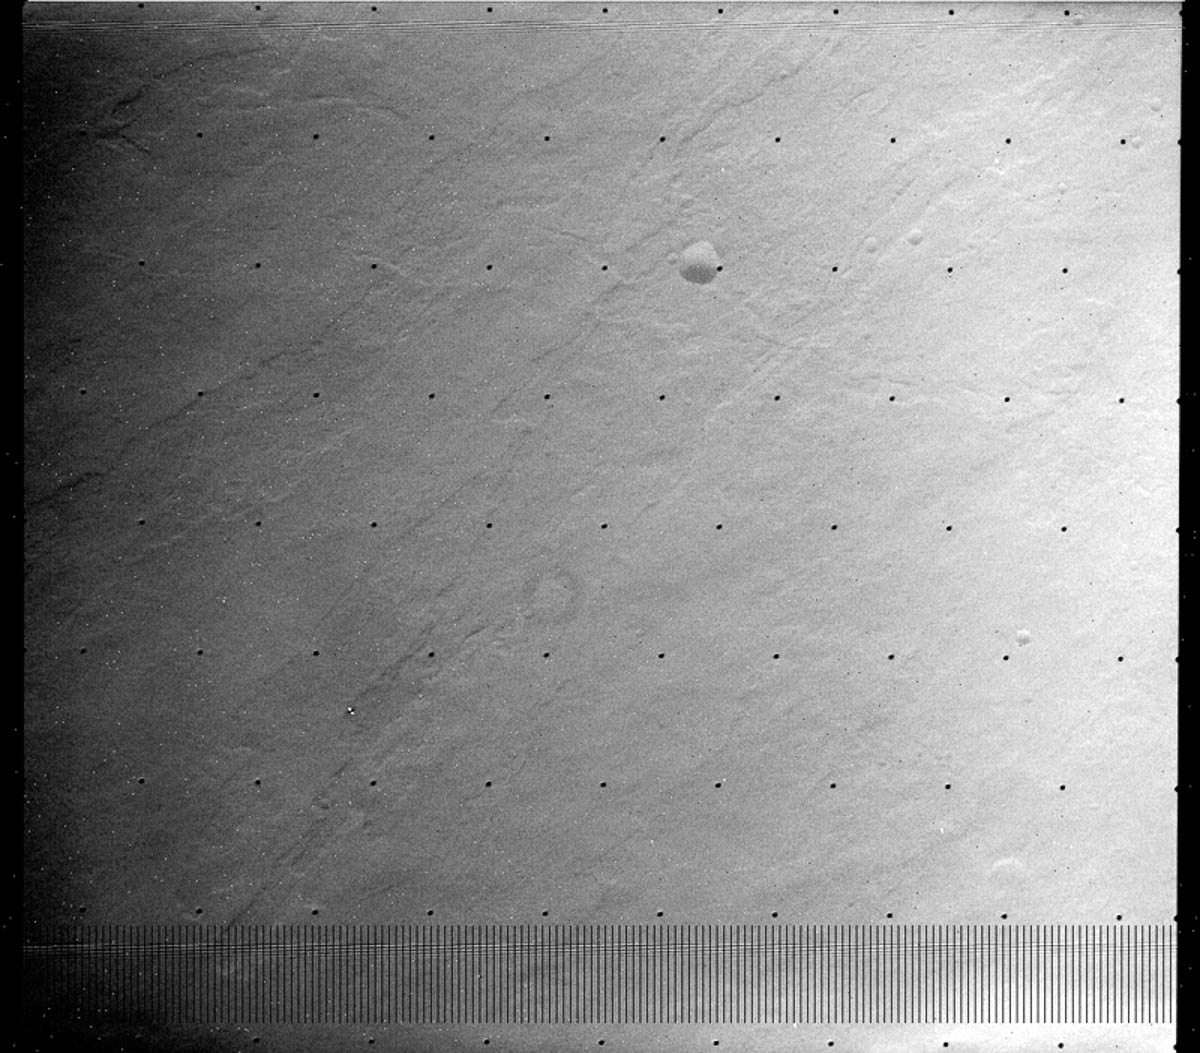 A photograph of the black and white speckle present in images taken by the Mars Viking Orbiter. The speckle is called salt and pepper noise because it has the appearance of grains of salt and pepper sprinkled across the image; it is a result of interference during the transfer of information from the spacecraft. 